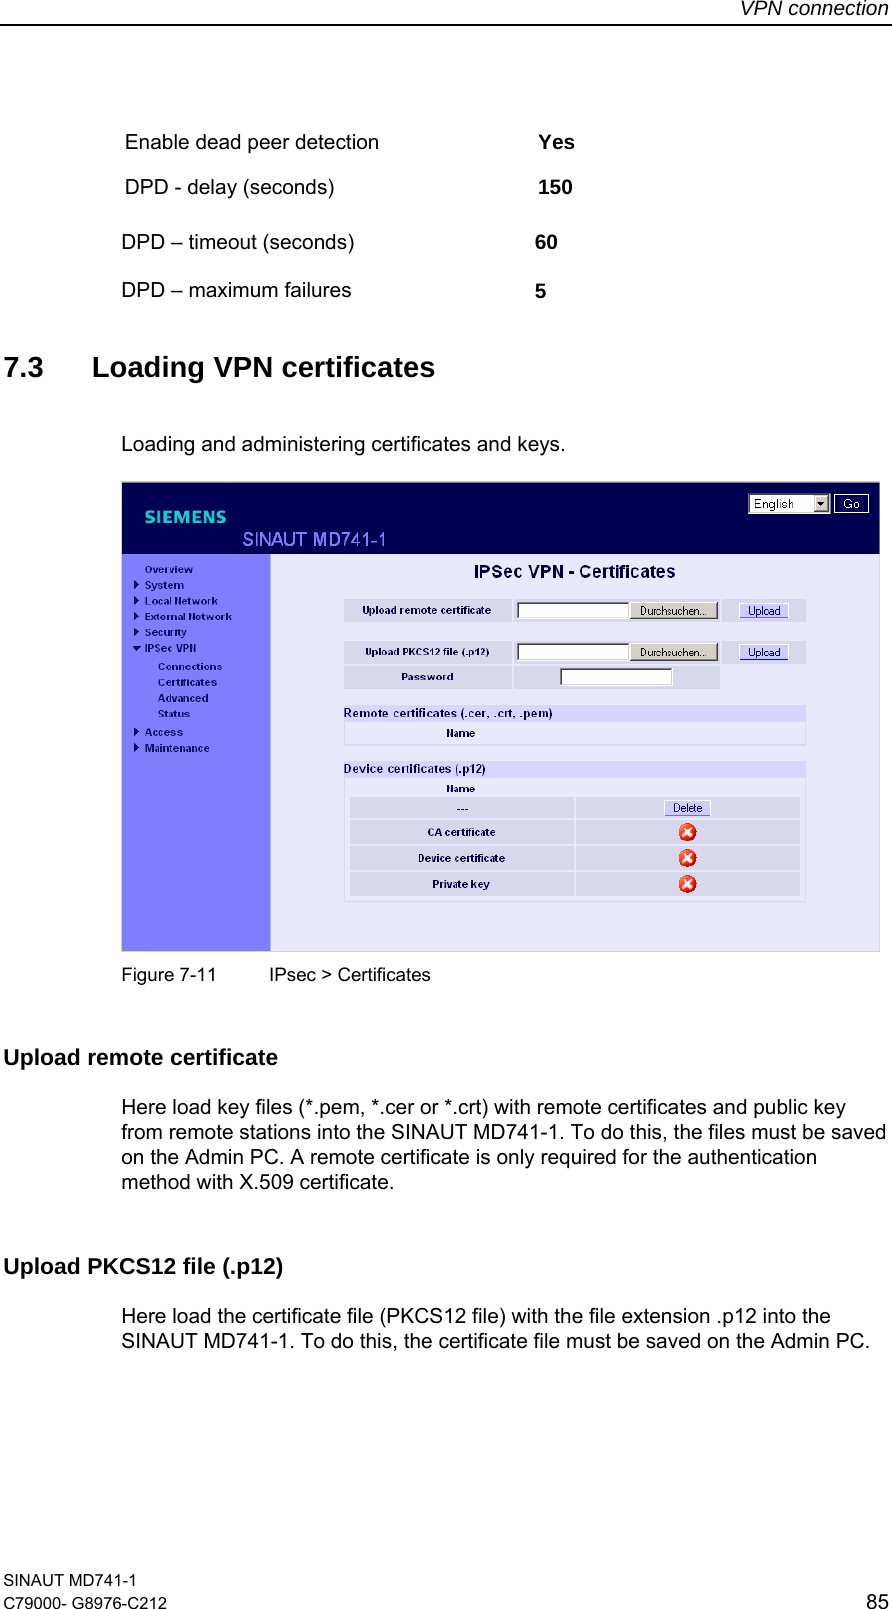 VPN connection SINAUT MD741-1 C79000- G8976-C212  85   Enable dead peer detection  Yes  DPD - delay (seconds)  150  DPD – timeout (seconds)  60  DPD – maximum failures  5   7.3 Loading VPN certificates Loading and administering certificates and keys.    Figure 7-11  IPsec &gt; Certificates Upload remote certificate  Here load key files (*.pem, *.cer or *.crt) with remote certificates and public key from remote stations into the SINAUT MD741-1. To do this, the files must be saved on the Admin PC. A remote certificate is only required for the authentication method with X.509 certificate. Upload PKCS12 file (.p12) Here load the certificate file (PKCS12 file) with the file extension .p12 into the SINAUT MD741-1. To do this, the certificate file must be saved on the Admin PC.   